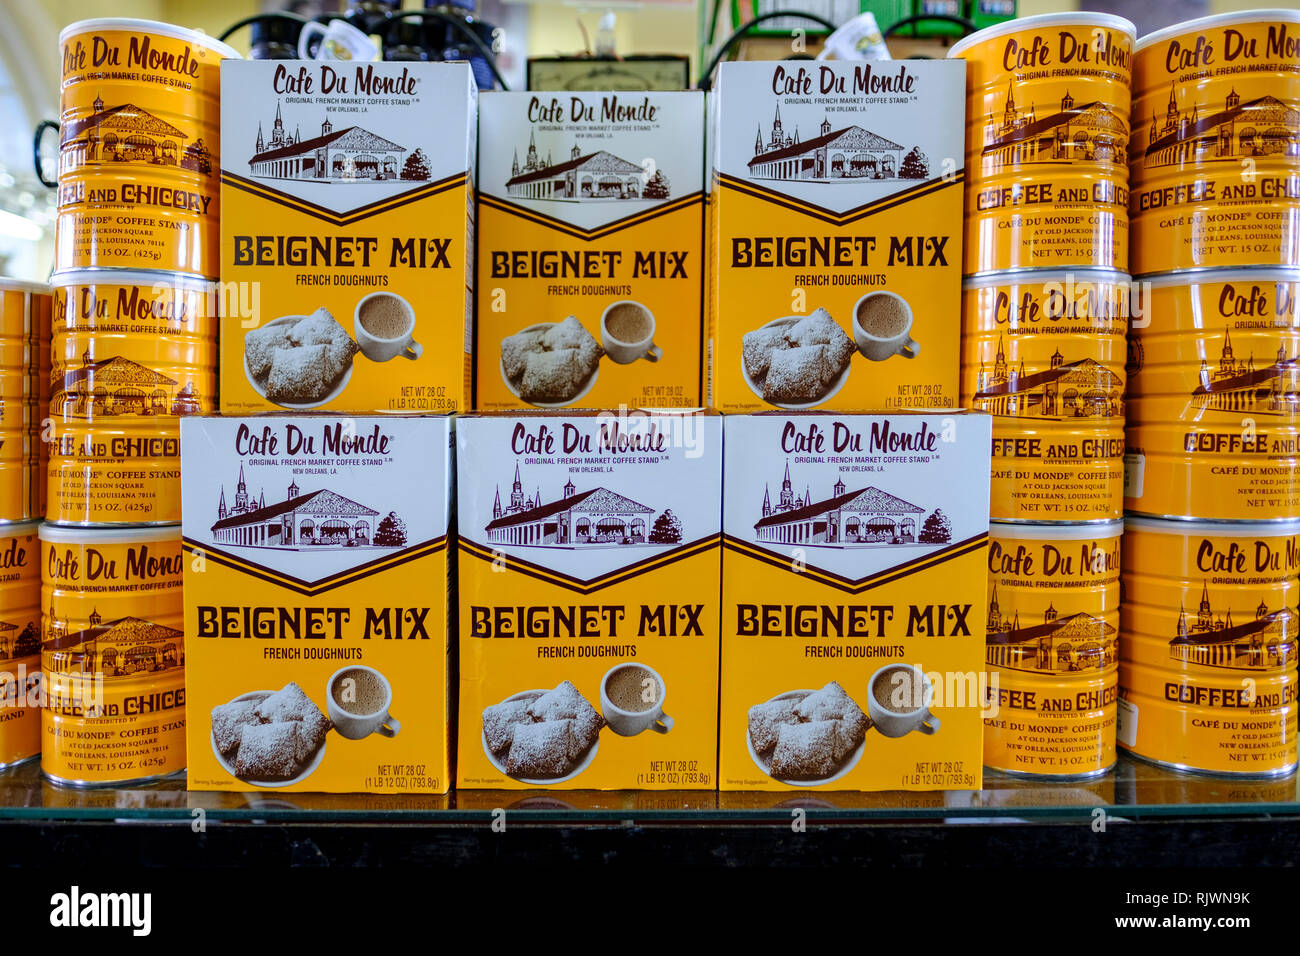 Retail store shelf with boxes and cans of Cafe Du Monde Beignet Mix French Doghnuts donuts, New Orleans French Quarter, New Orleans, Louisiana, USA. Stock Photo